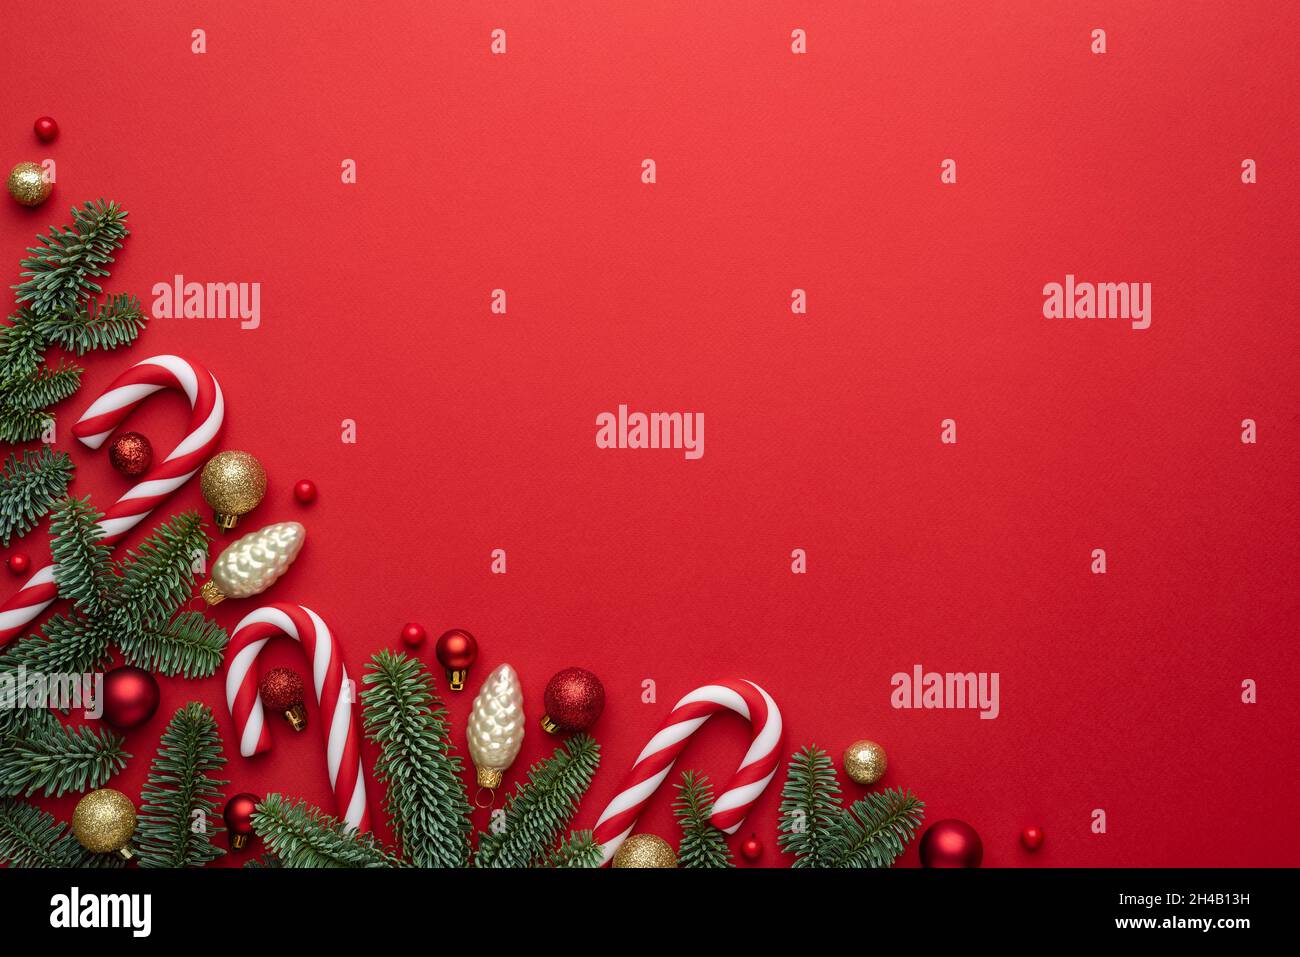 Christmas or New Year red background with fir decor. Blank for advertising text with copy space. Top view, flat lay Stock Photo